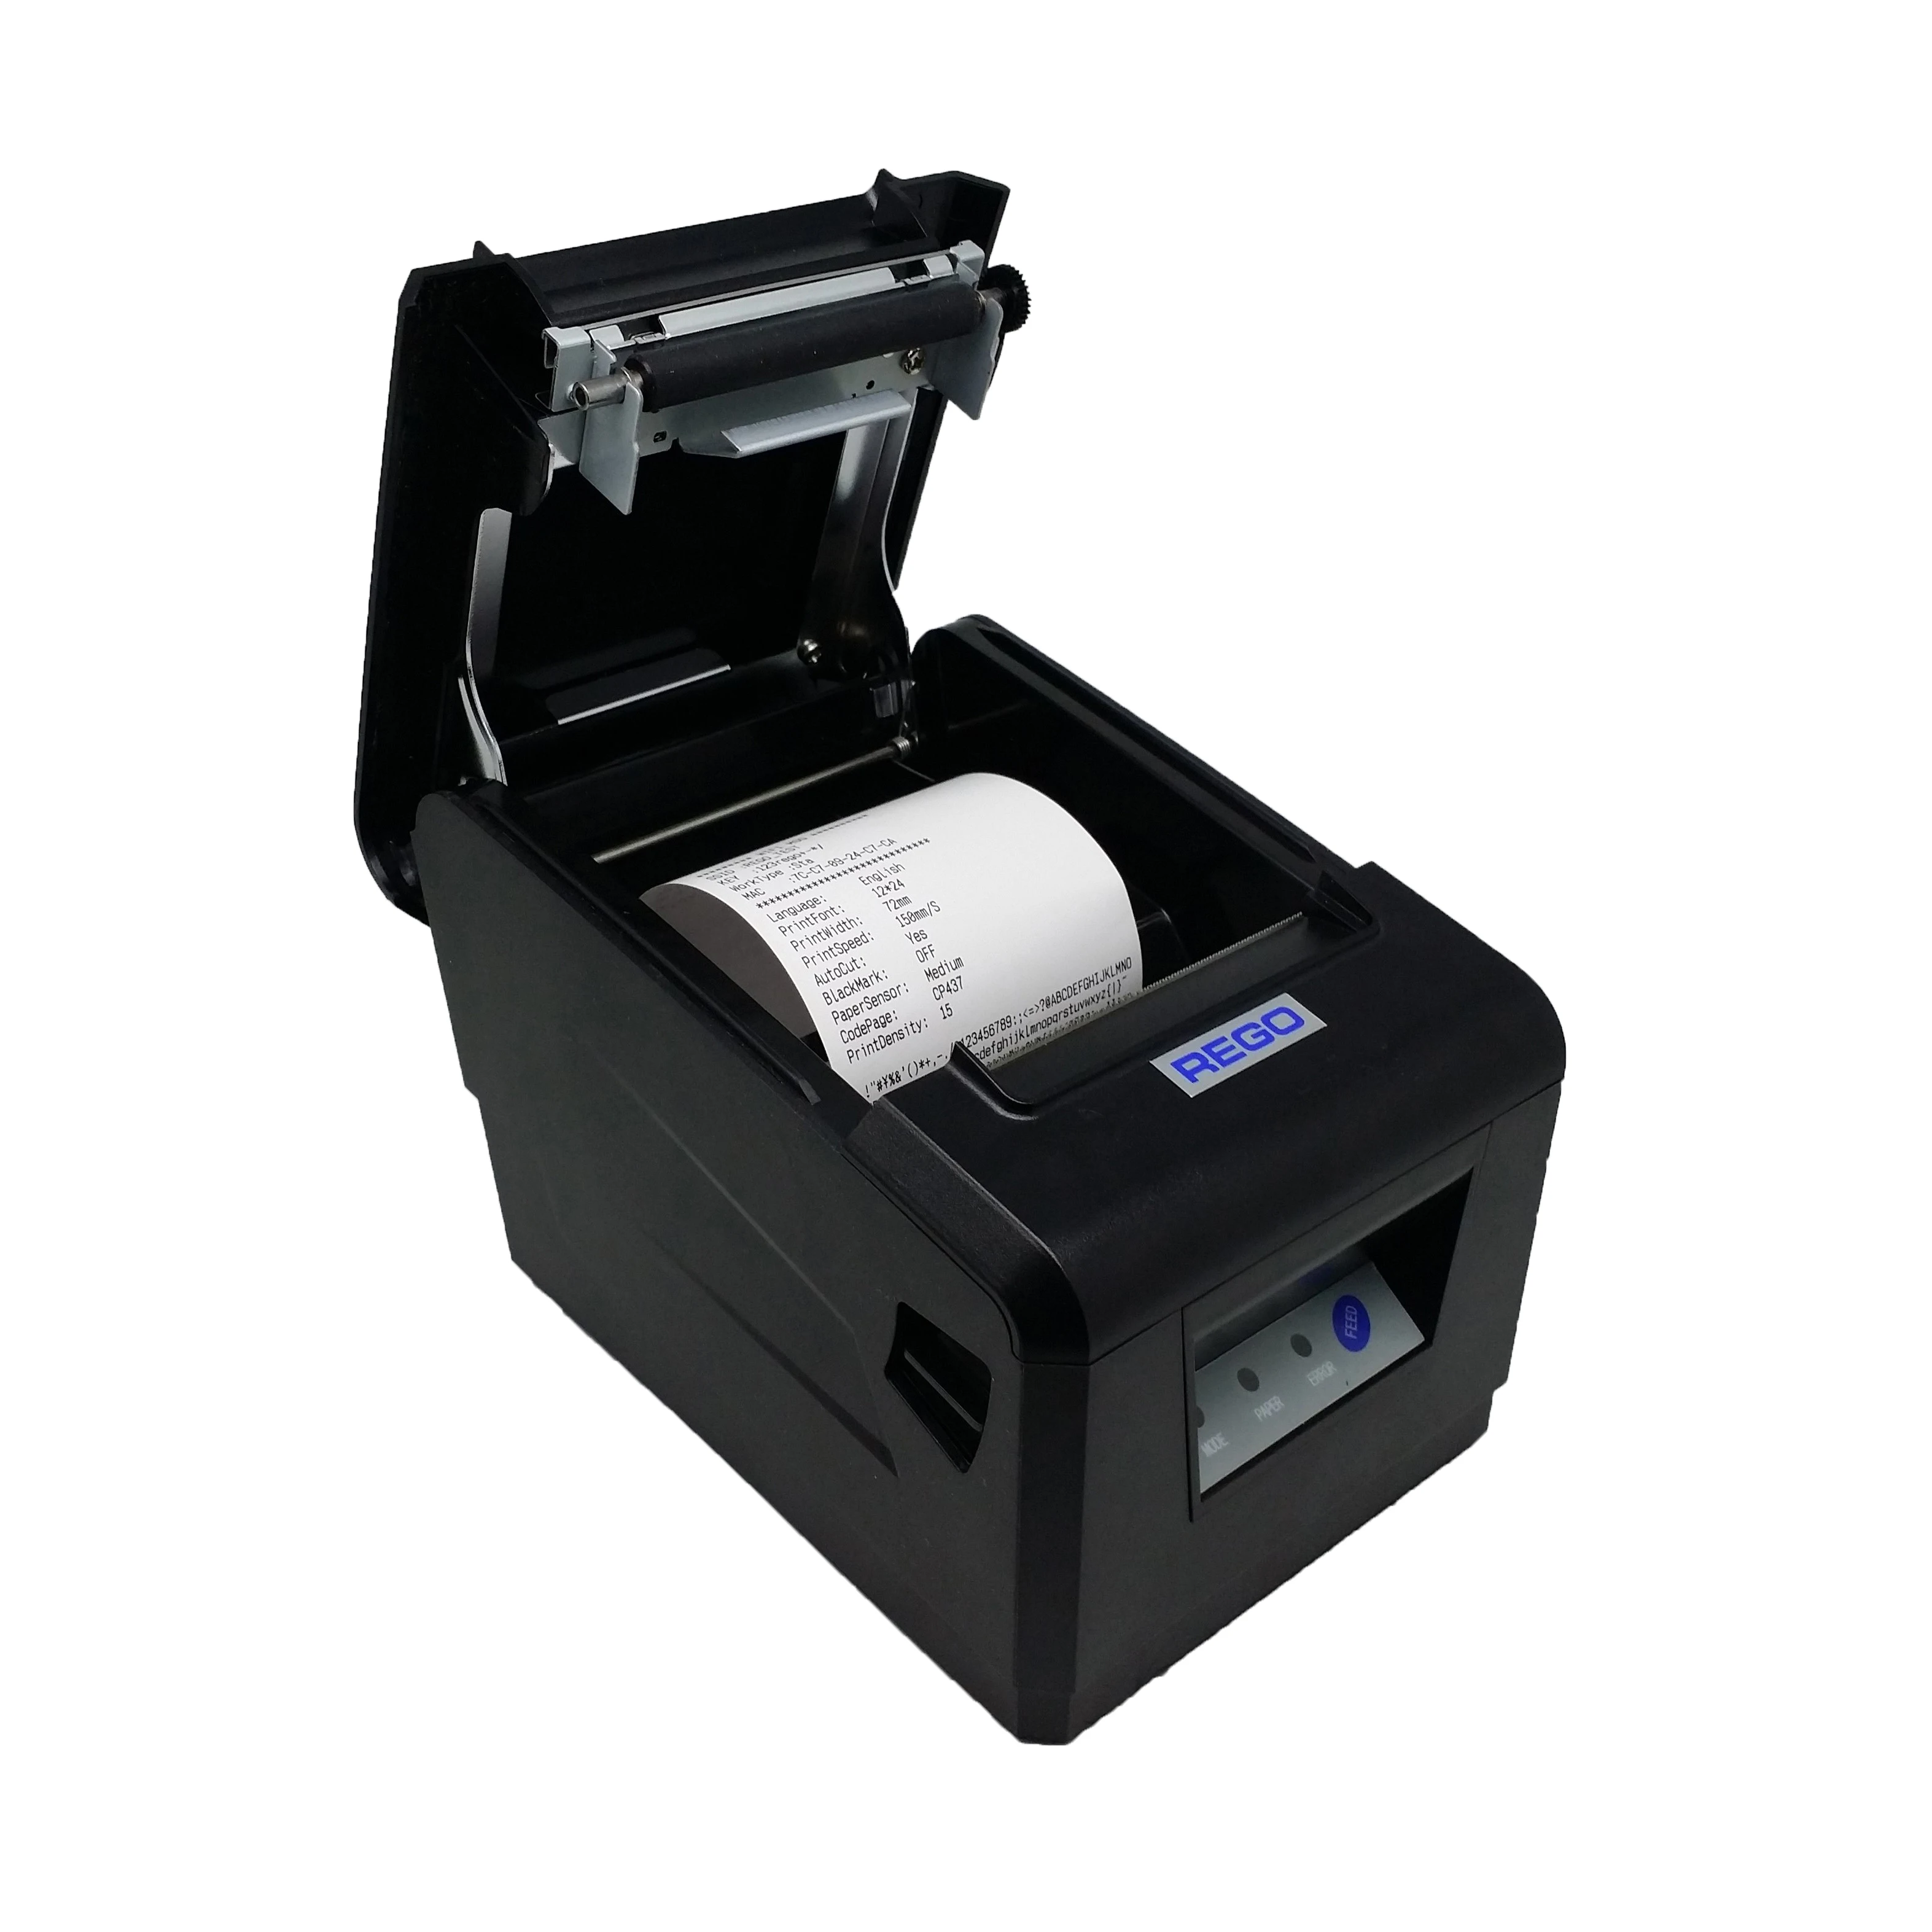 

High Speed Auto Cut Pos Thermal Receipt Printer 80mm with USB/ Ethernet Interface